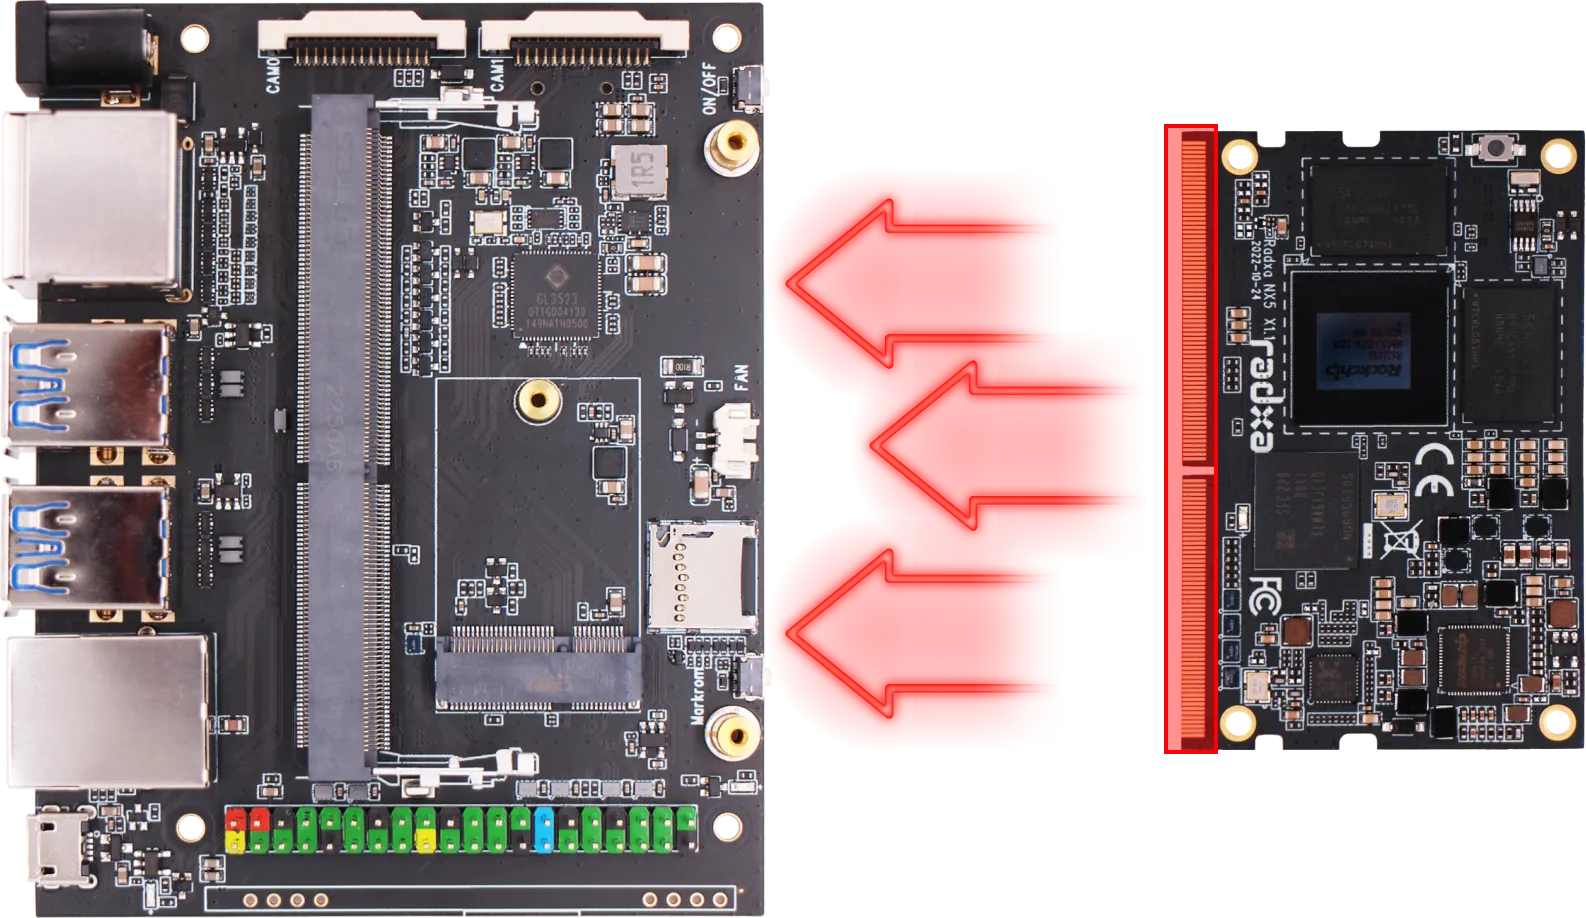 Standard and Conveniently Pluggable SODIMM Connector